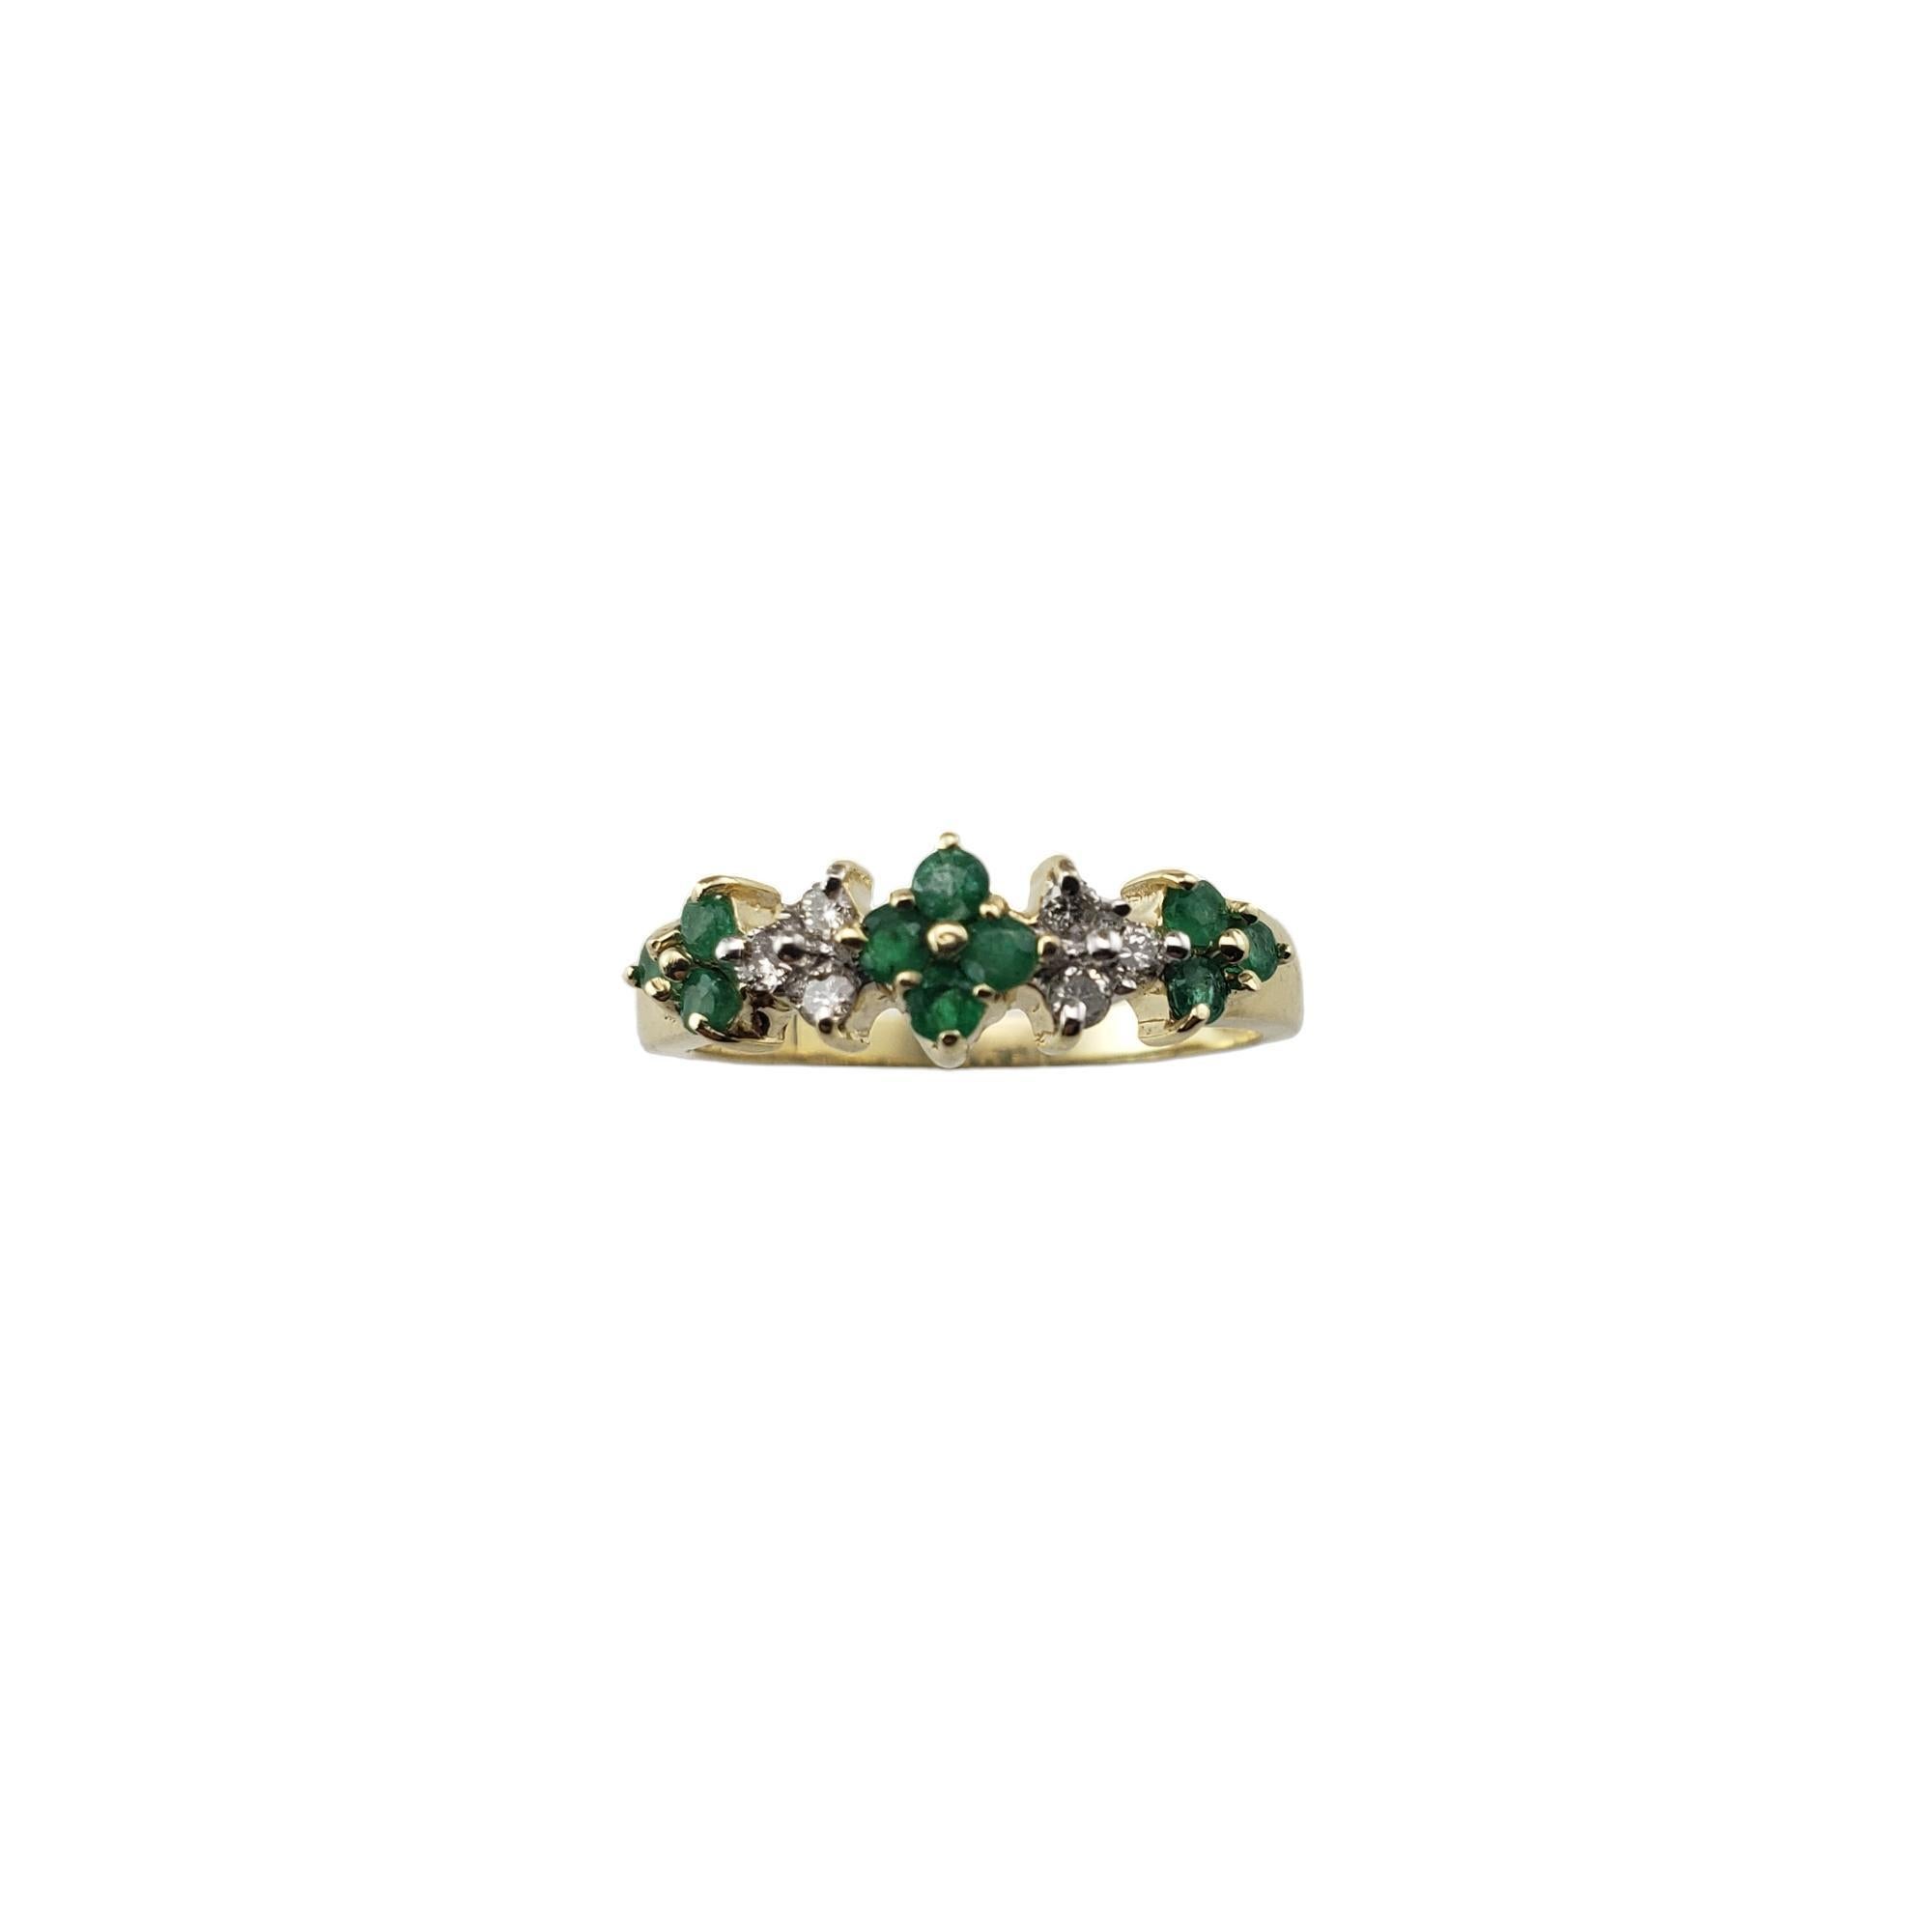 Vintage 14 Karat Yellow Gold Emerald and Diamond Ring Size 7-

This elegant ring features ten round emeralds and six round brilliant cut diamonds set in classic 14K yellow gold.  Width:  6 mm.  Shank: 1.9 mm.

Approximate total diamond weight:   .12